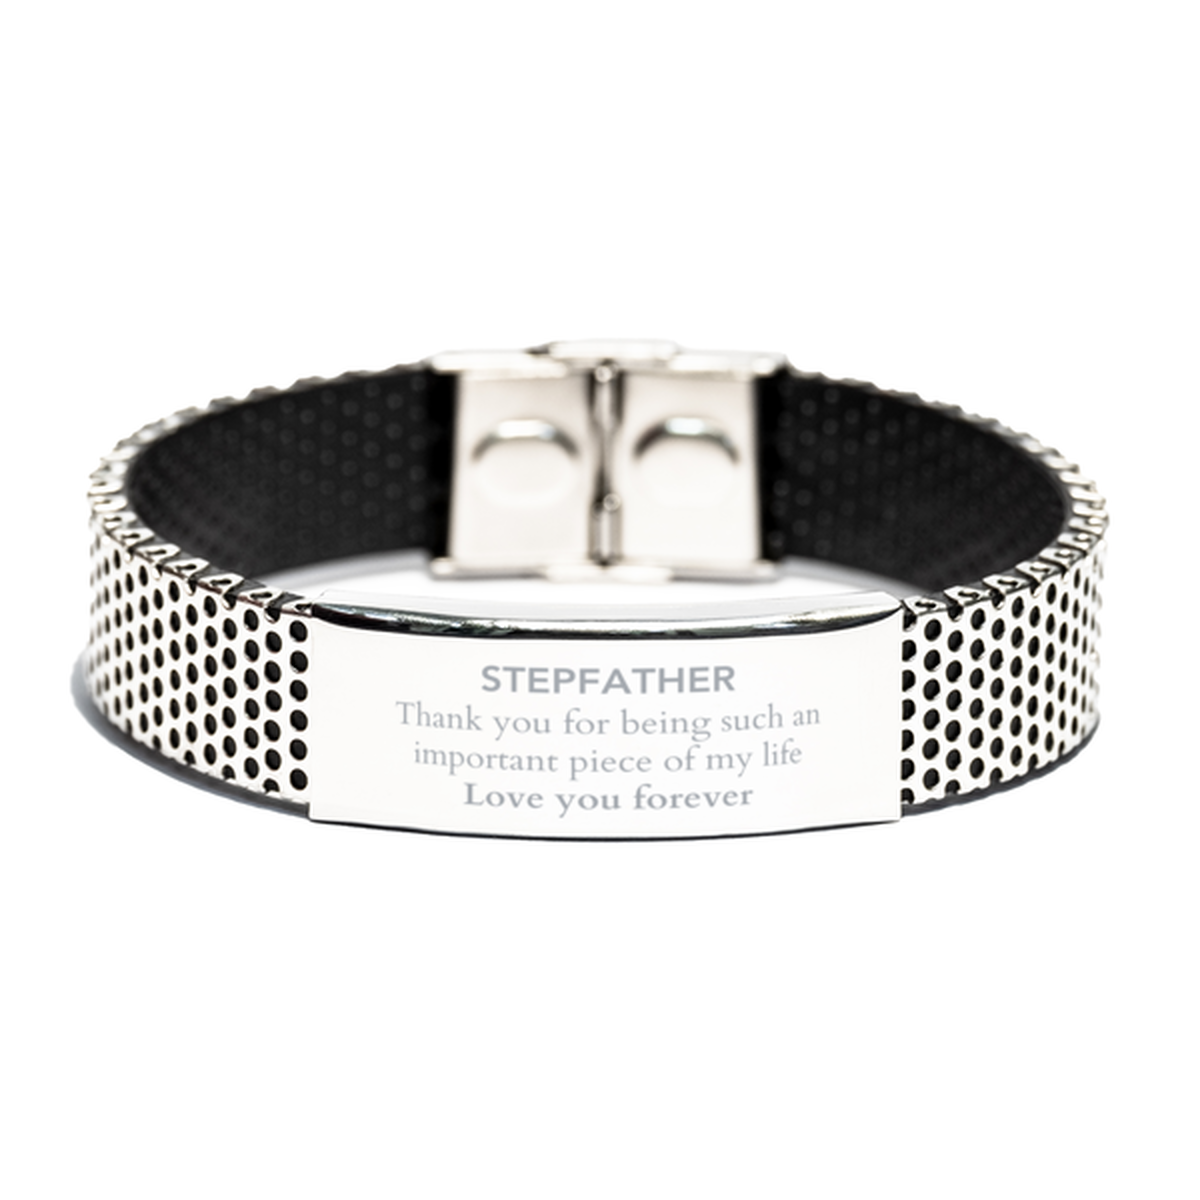 Appropriate Stepfather Stainless Steel Bracelet Epic Birthday Gifts for Stepfather Thank you for being such an important piece of my life Stepfather Christmas Mothers Fathers Day